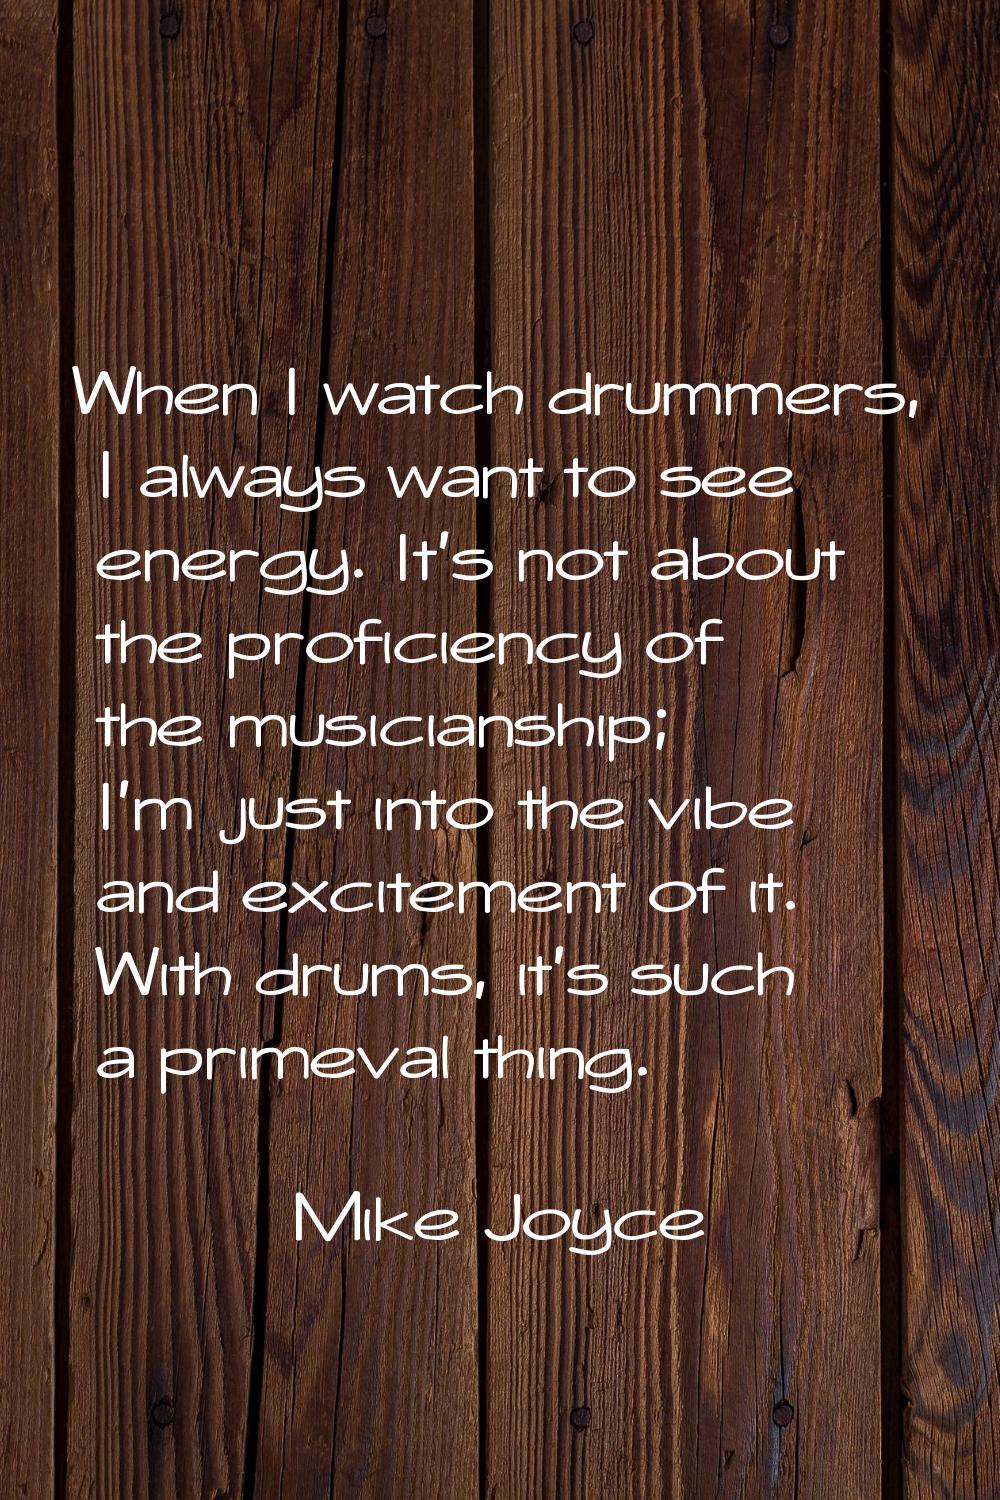 When I watch drummers, I always want to see energy. It's not about the proficiency of the musicians